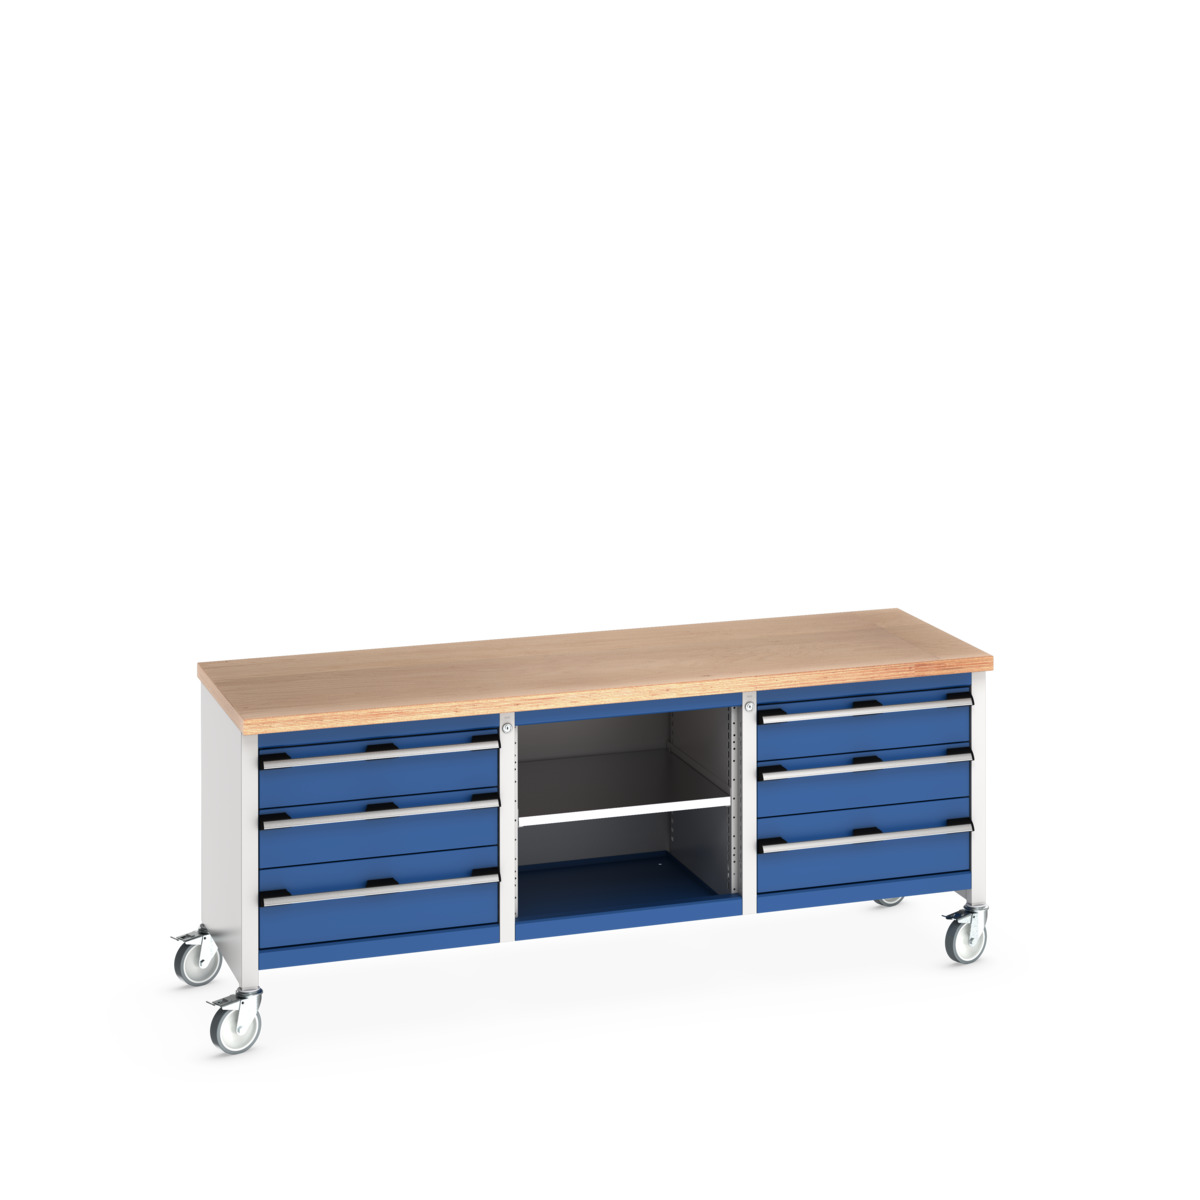 41002130.11V - cubio mobile storage bench (mpx)